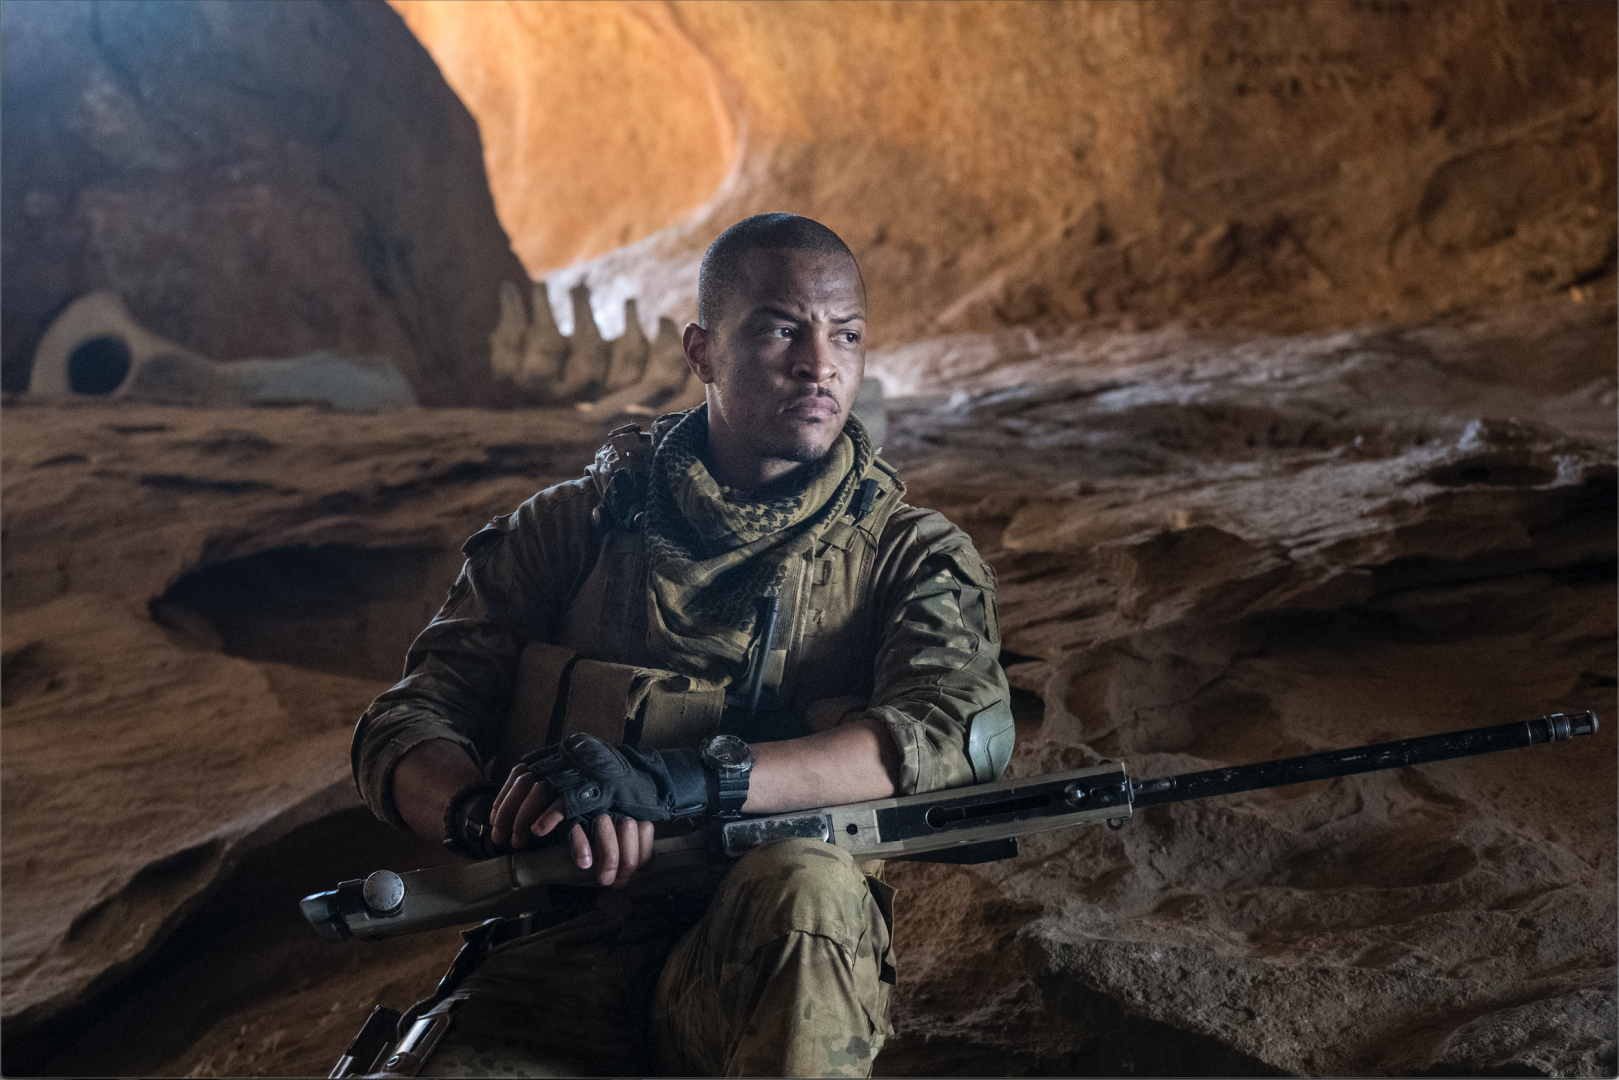 T.I. fights very different battle in new film, 'Monster Hunter'